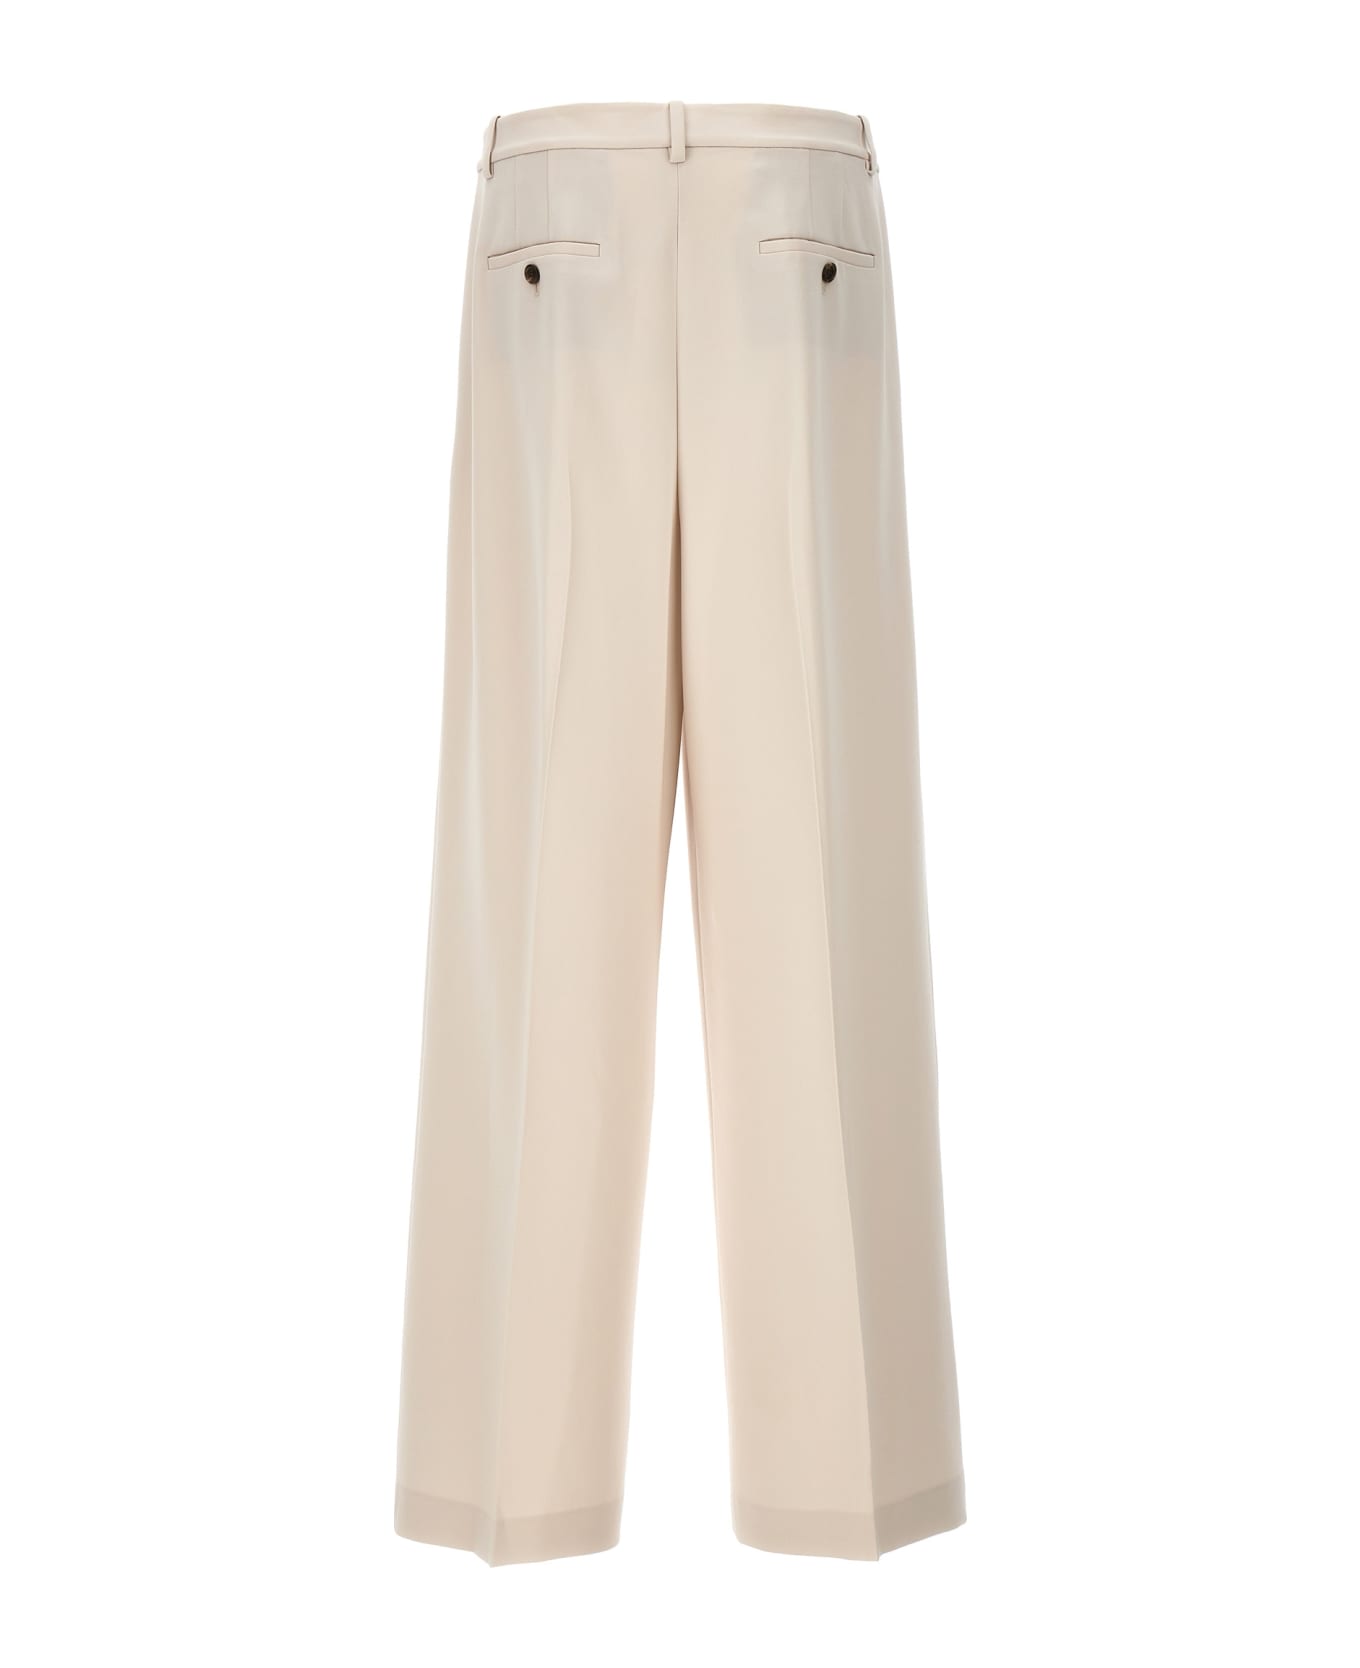 Theory 'admiral Crepe' Pants - Beige ボトムス